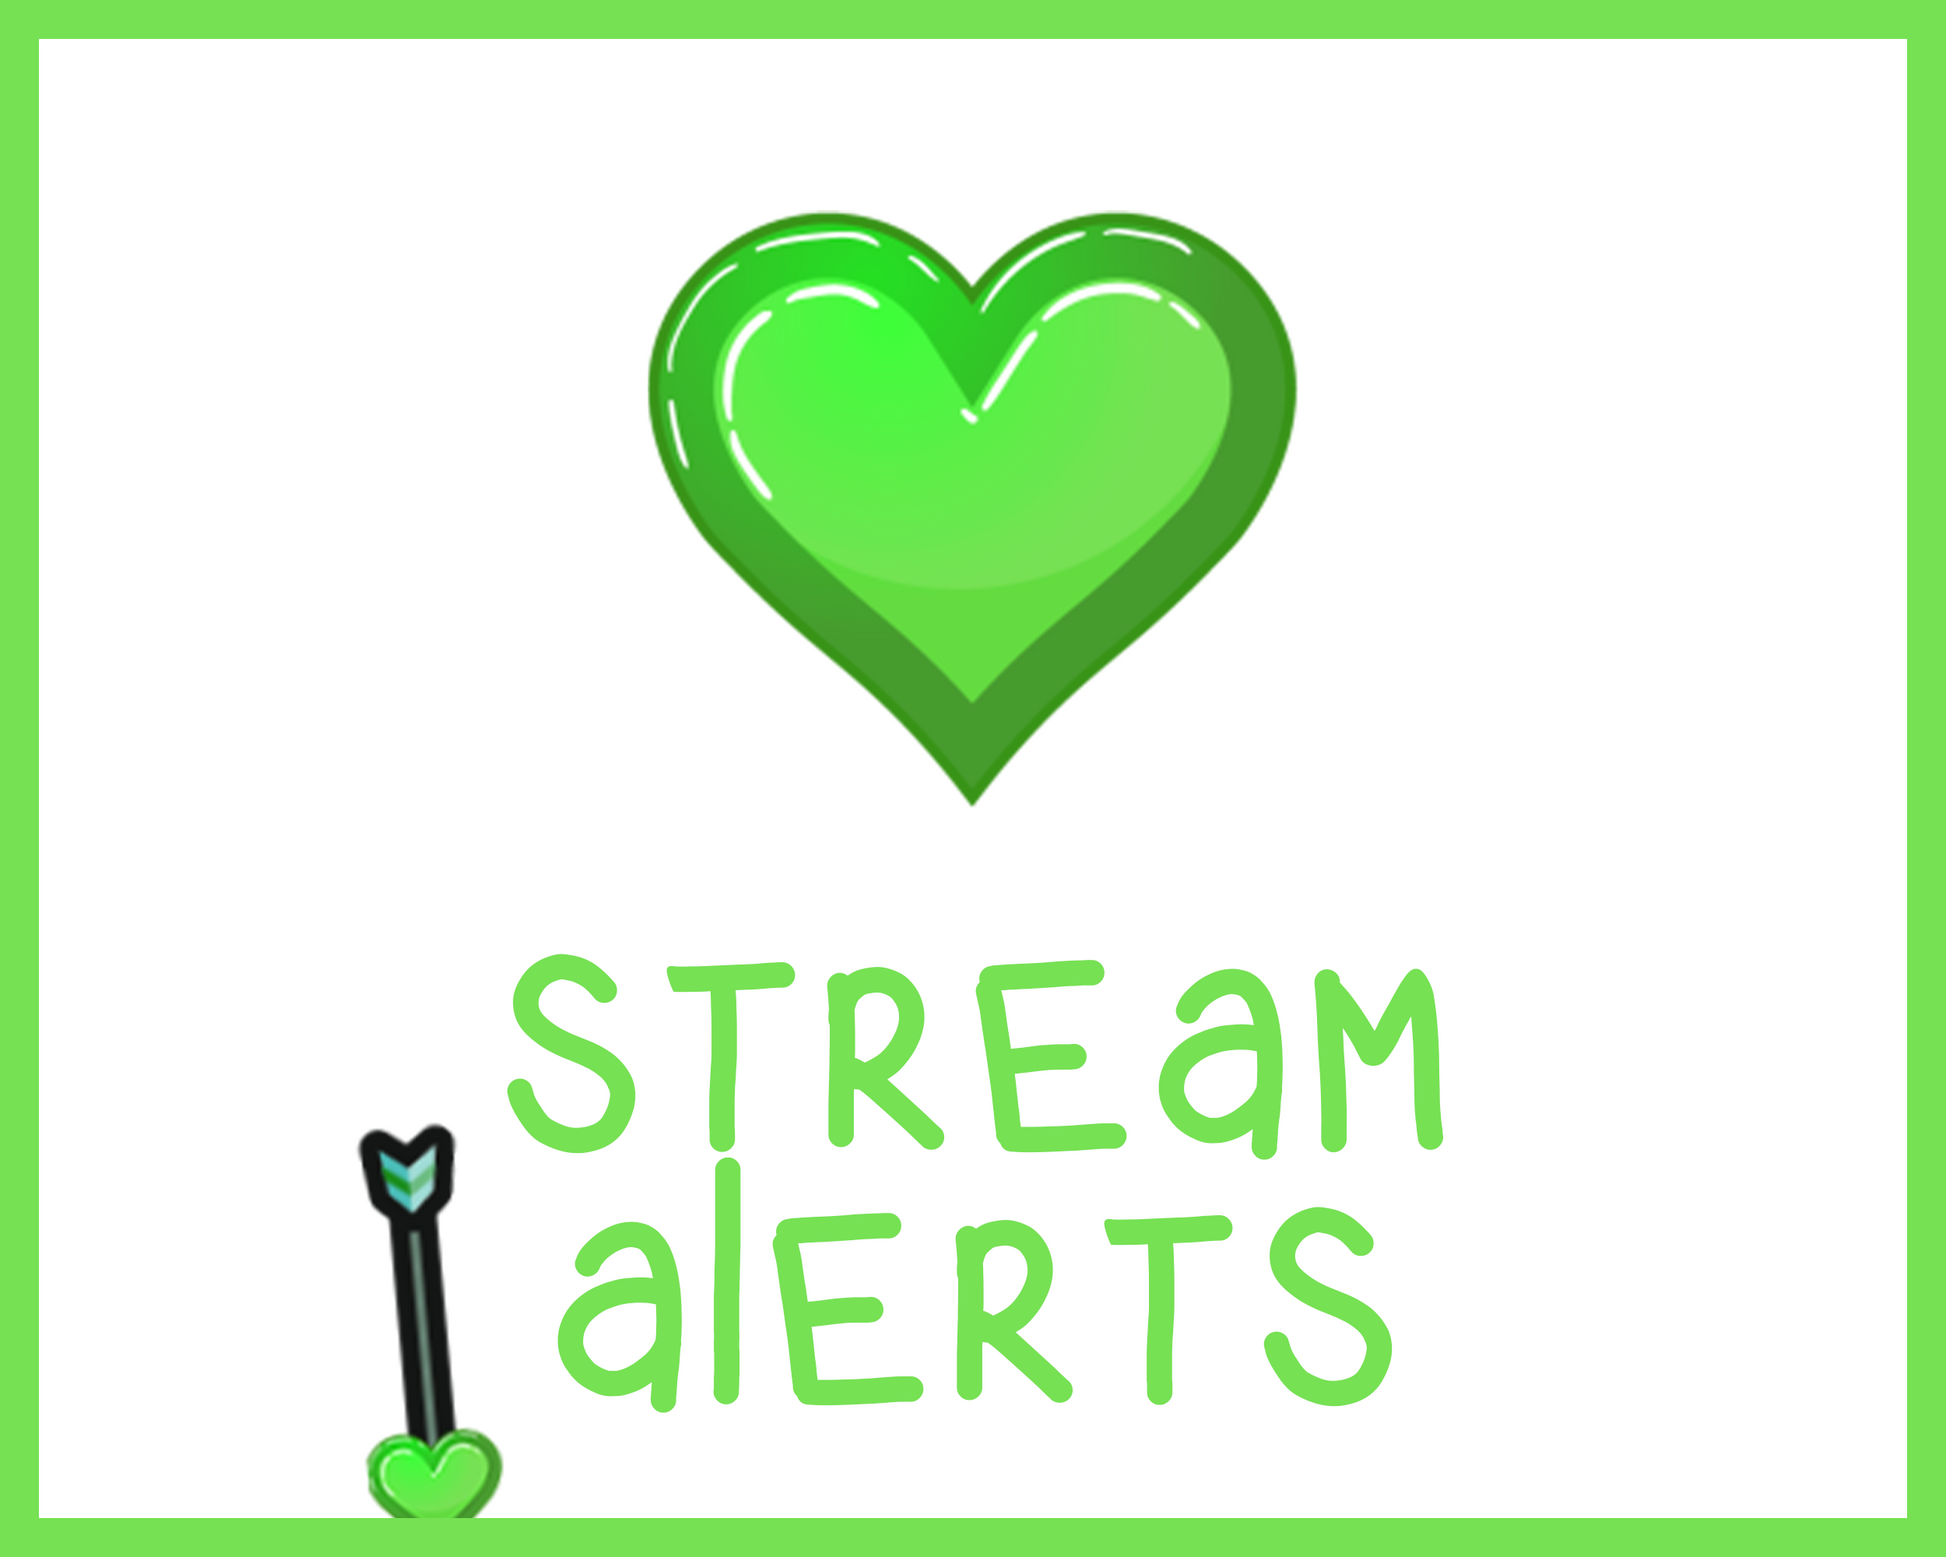 Love Arrow Animated Alerts for Twitch Streams, Cute Kawaii Heart Overlay, Follow Subscribe Cheer Raid Donation Gift, Valentines Day, Eros